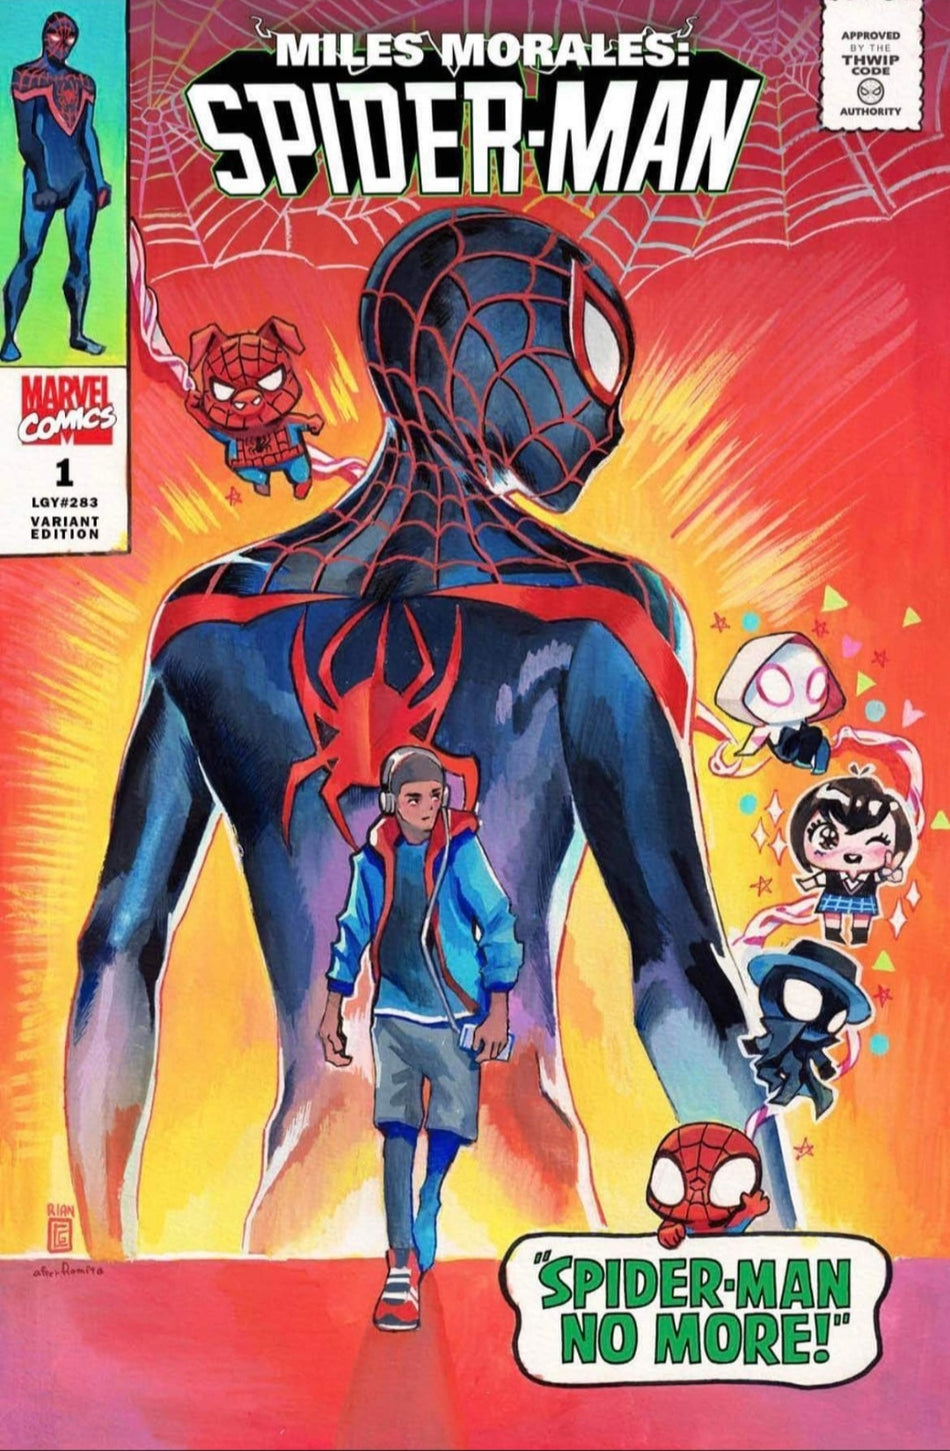 Miles Morales: Spider-Man #1 Rian Gonzales ASM #50 Homage Shared Store Exclusive Variant LTD 2,500